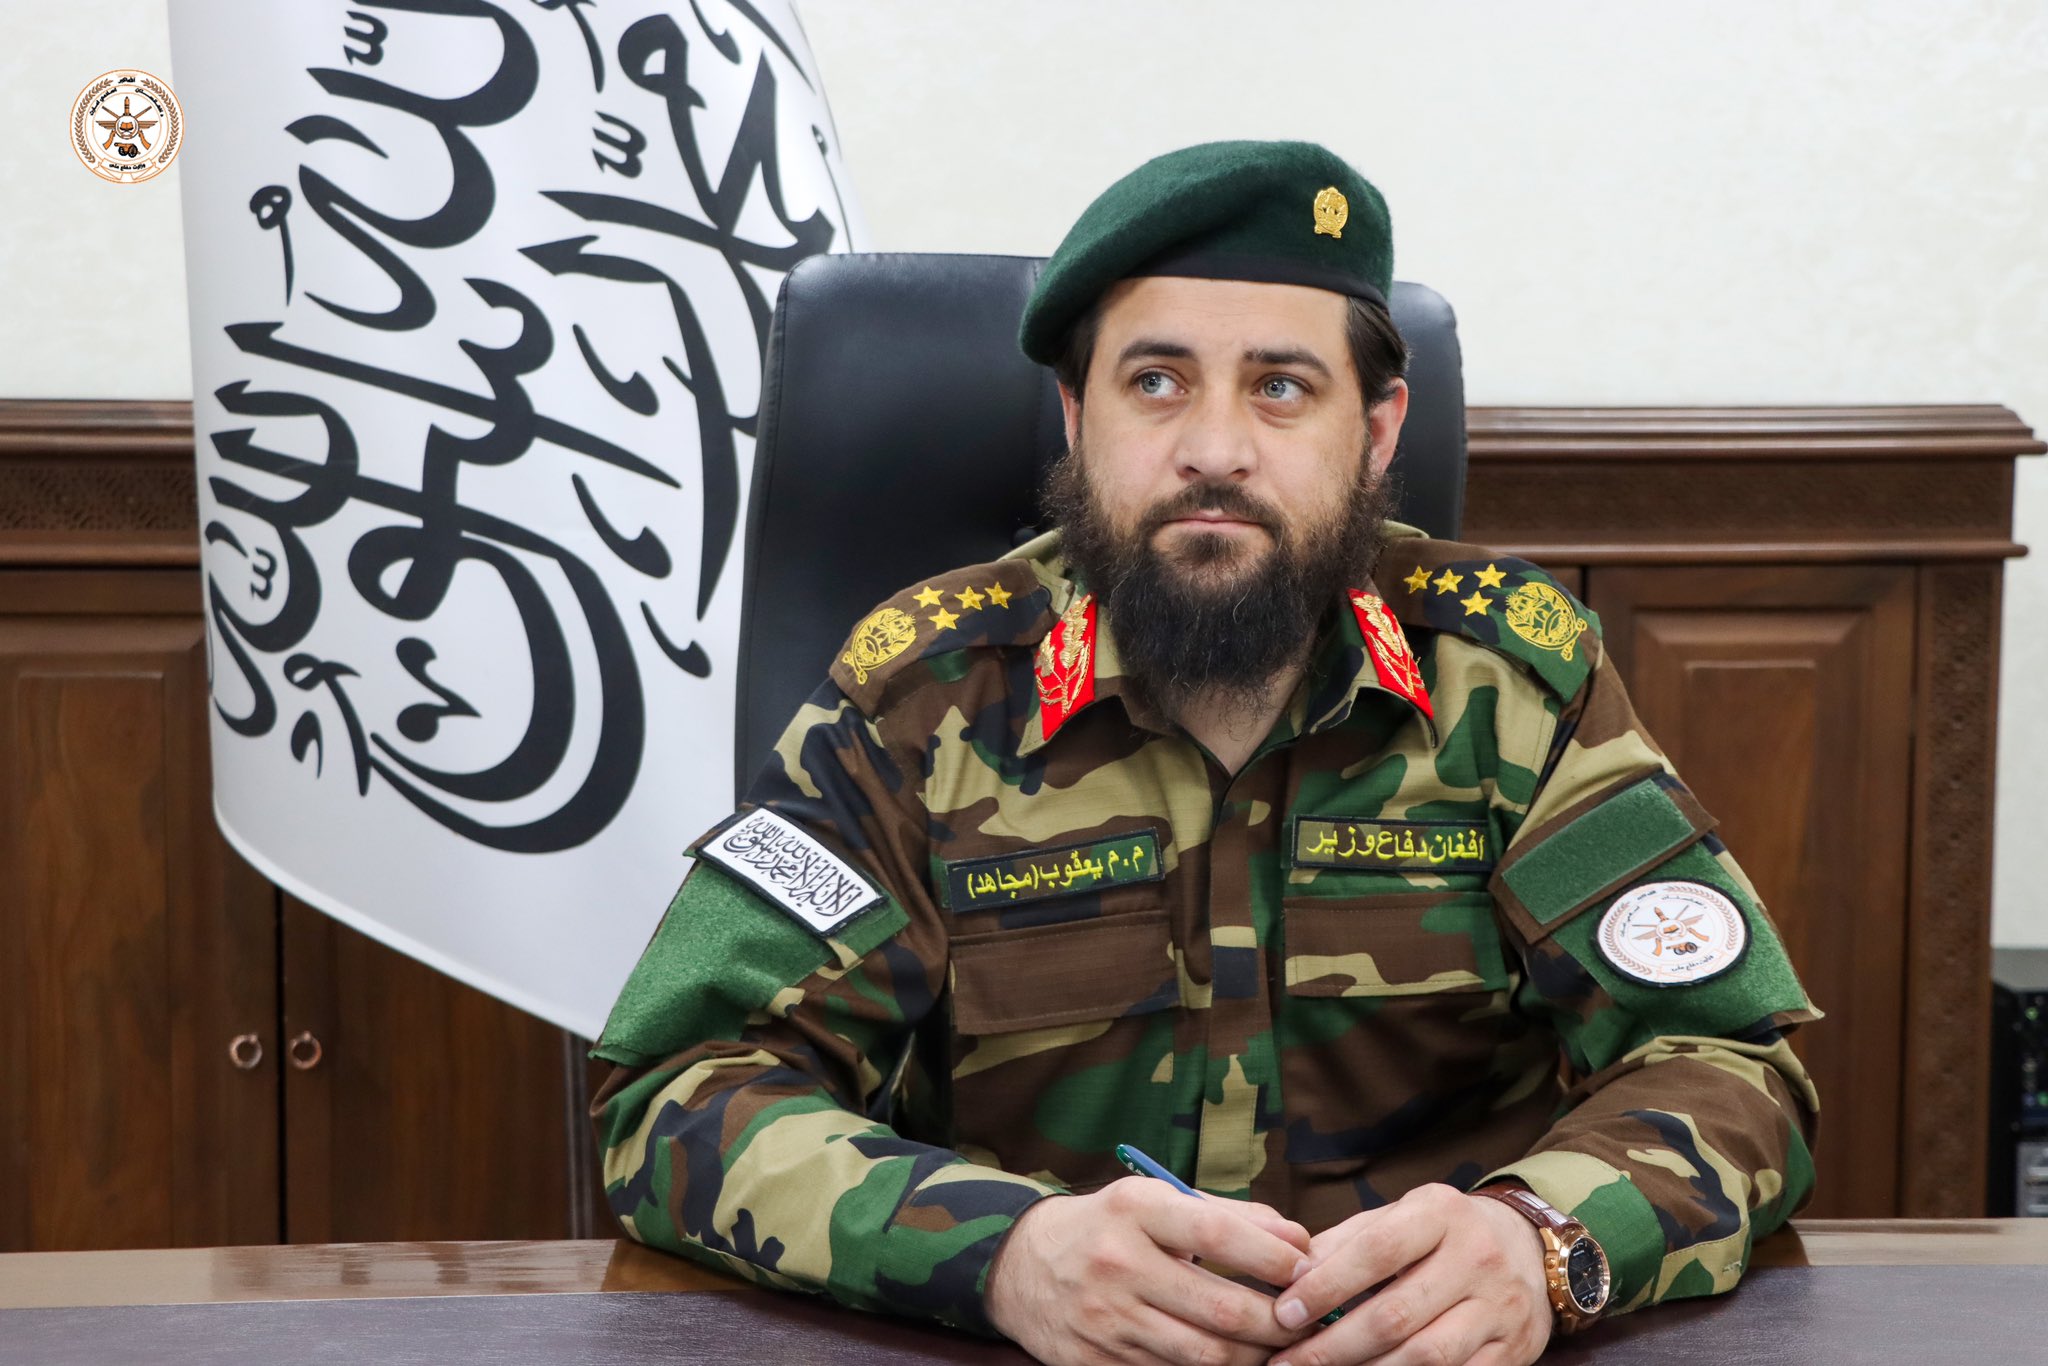 In a press release by the Ministry of Defense of the Taliban government in Afghanistan, a picture of Mullah Yaqub Mujahid, the Acting Minister of Defense of Afghanistan, is shown wearing military uniform.